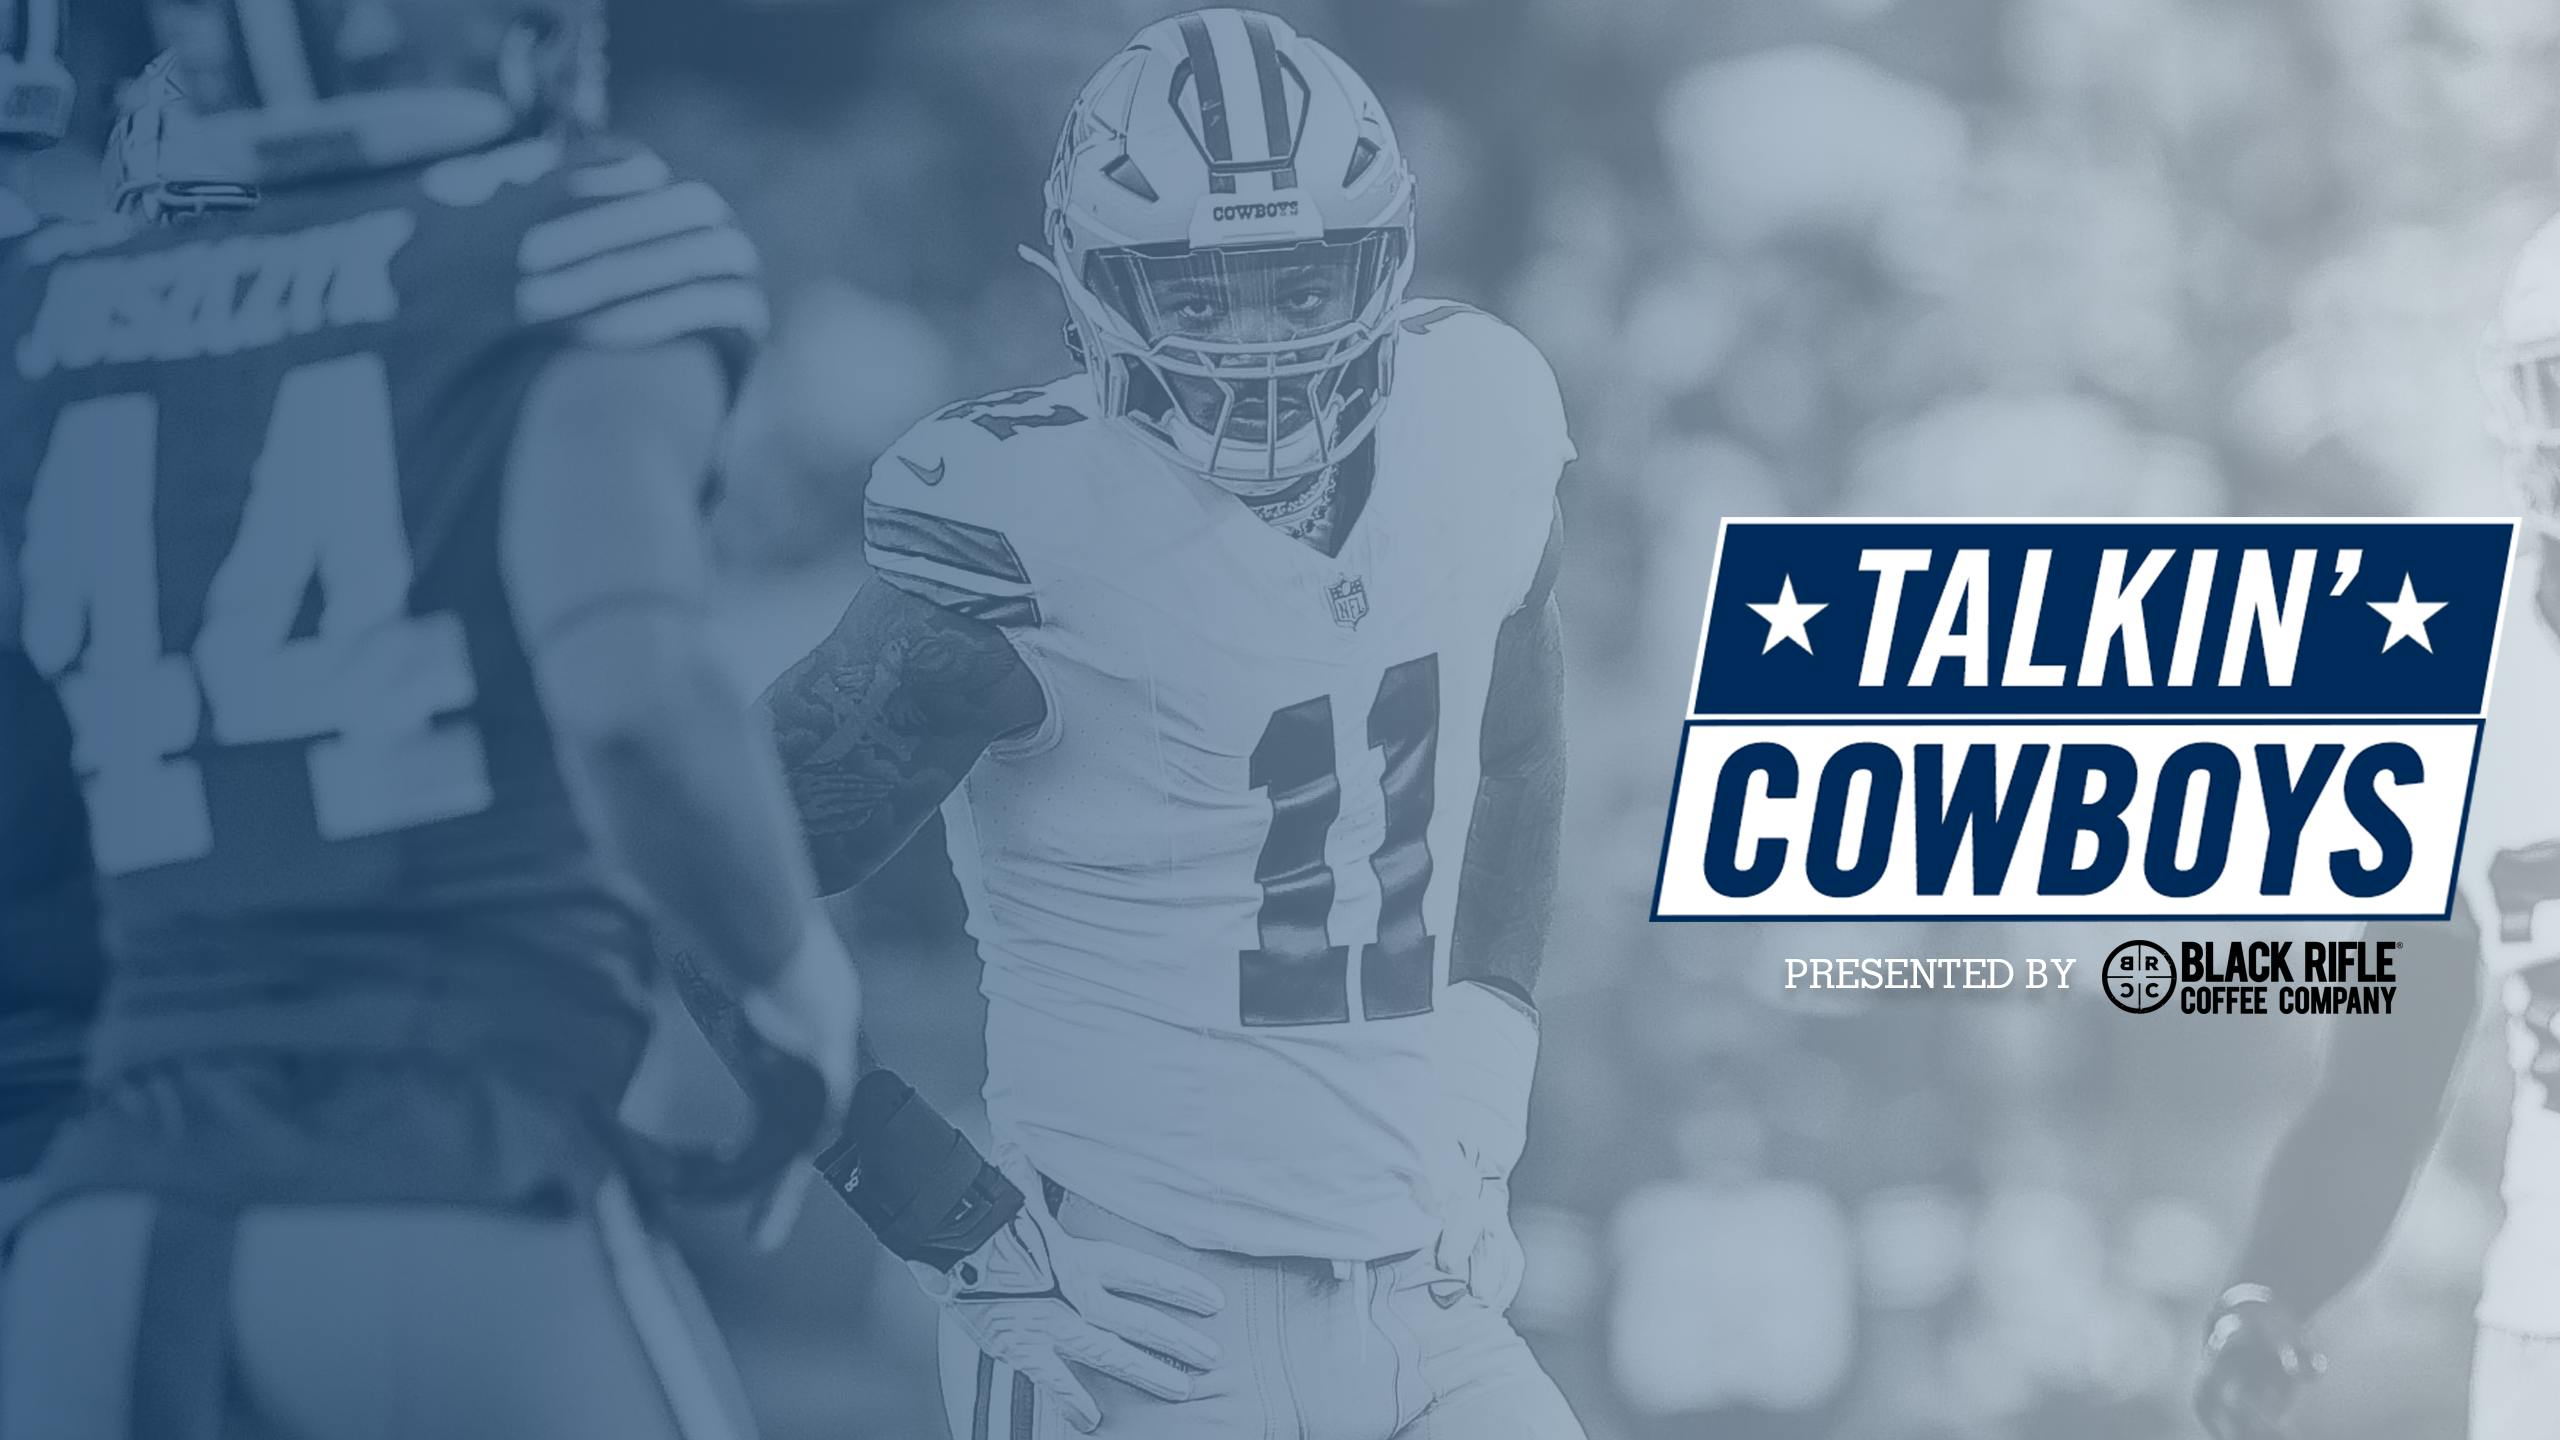 Talkin’ Cowboys: Turn the Page